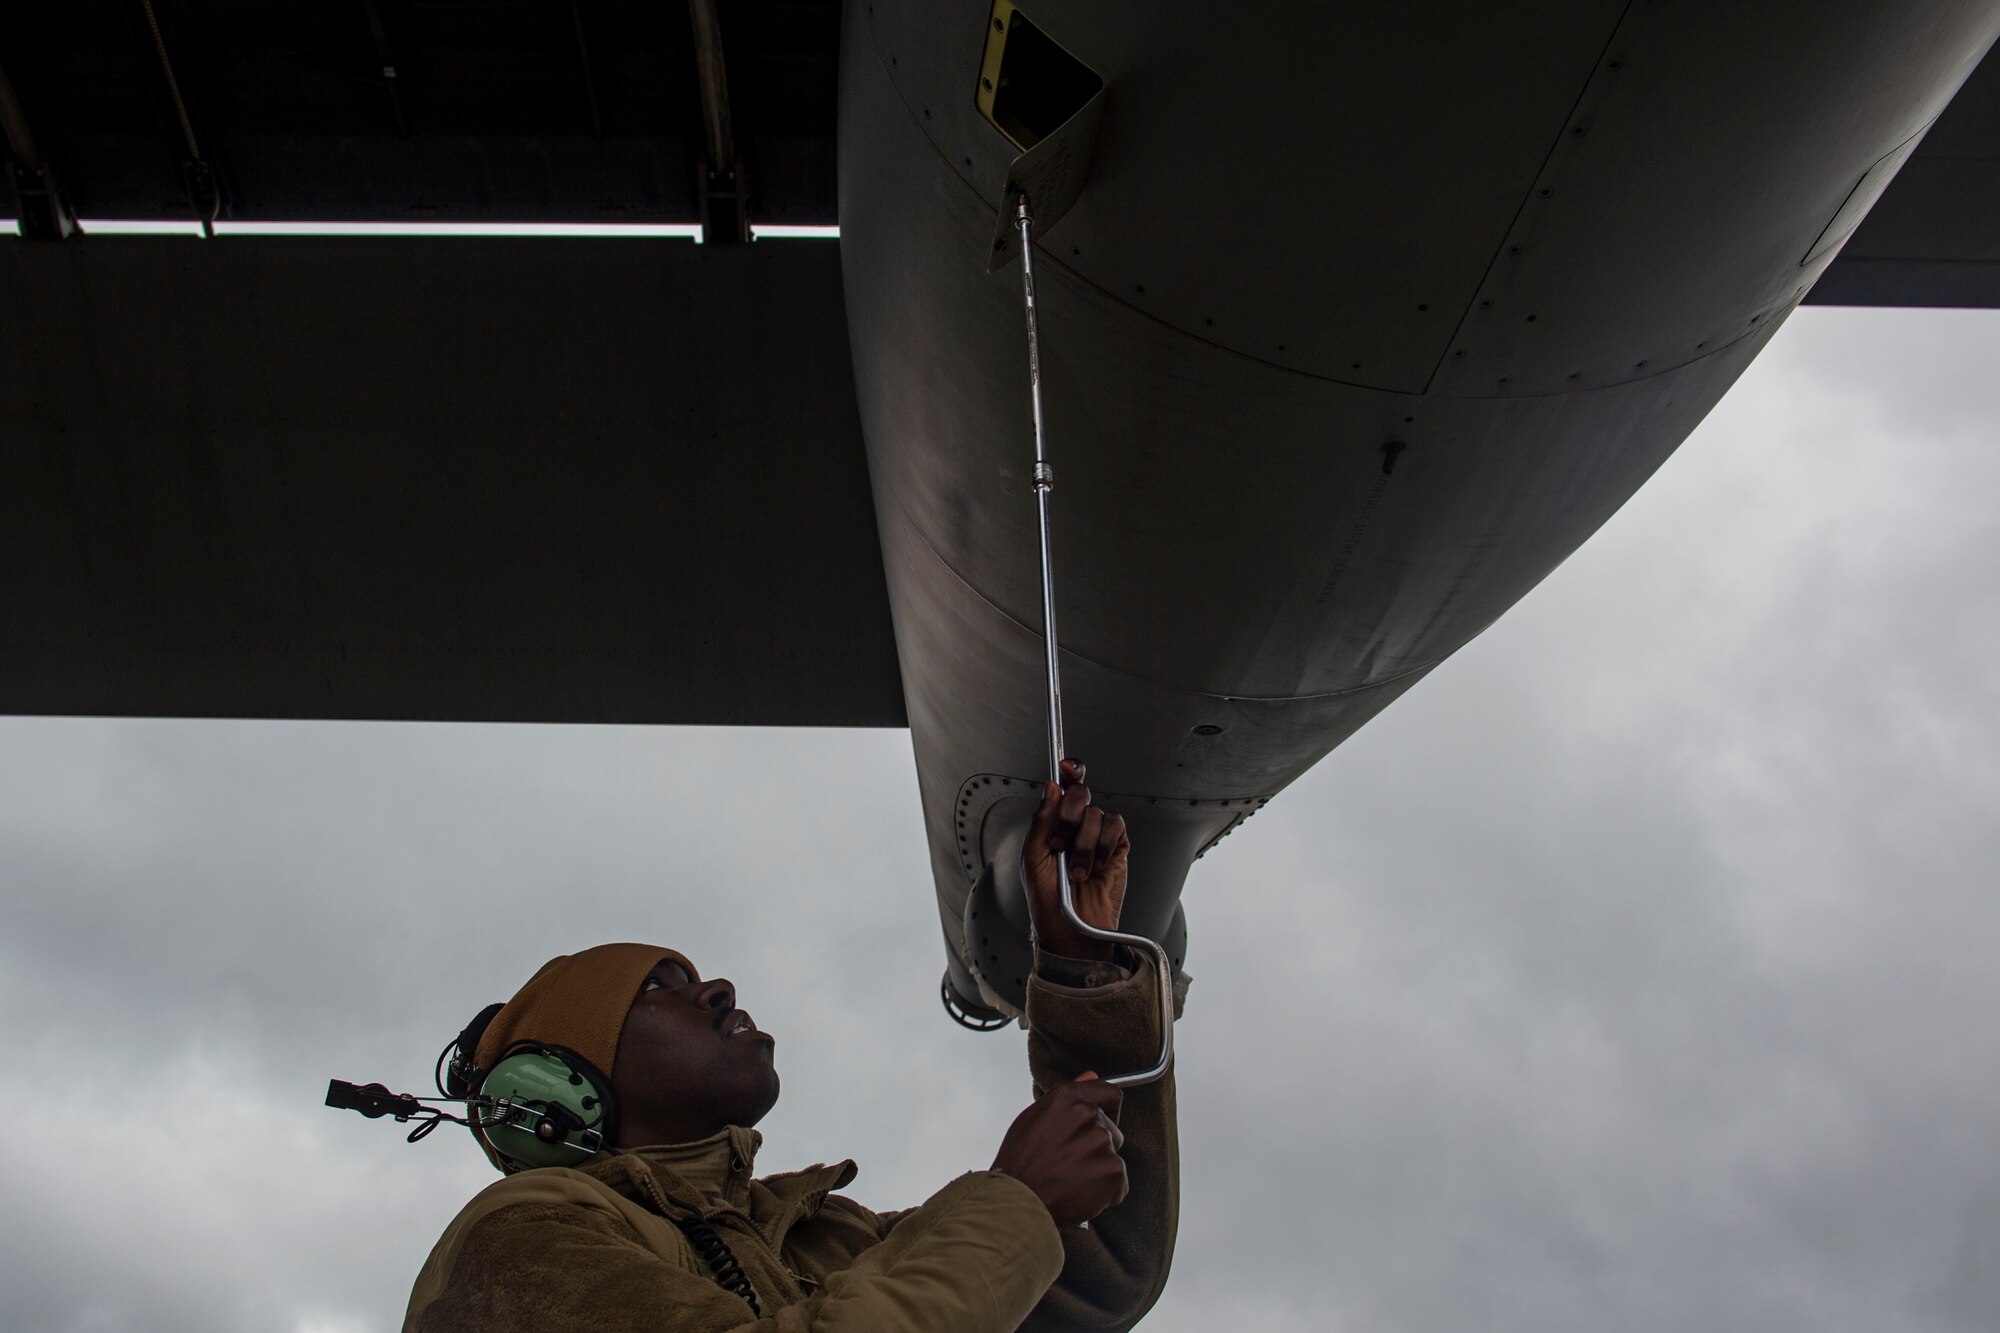 A photo of an Airman opening a compartment on an aircraft.